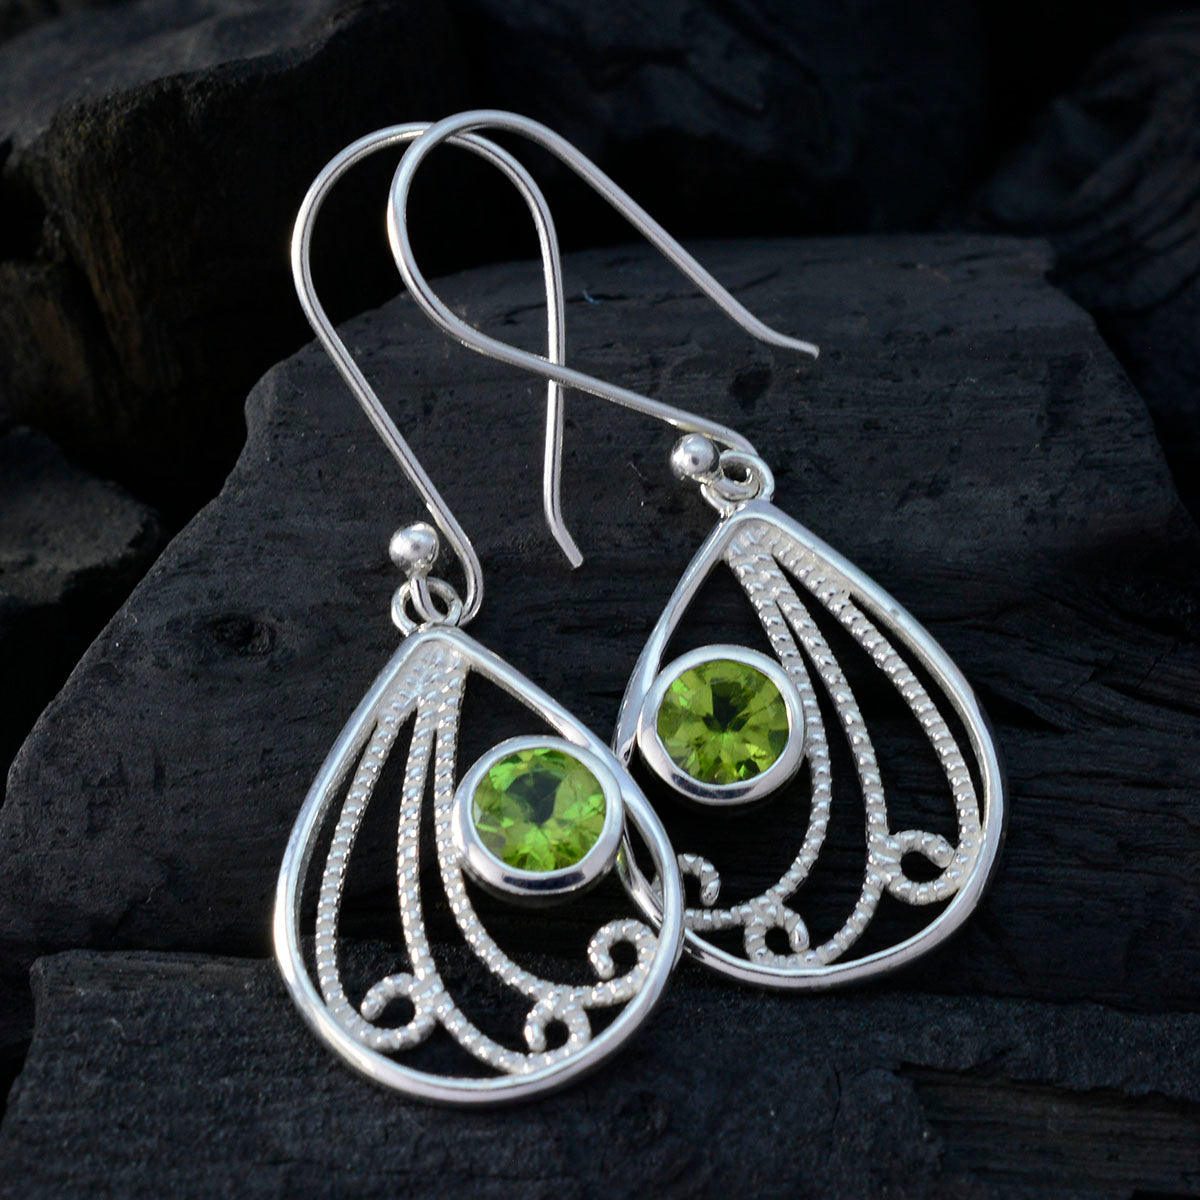 Riyo Genuine Gems round Faceted Green Peridot Silver Earring gift for mother